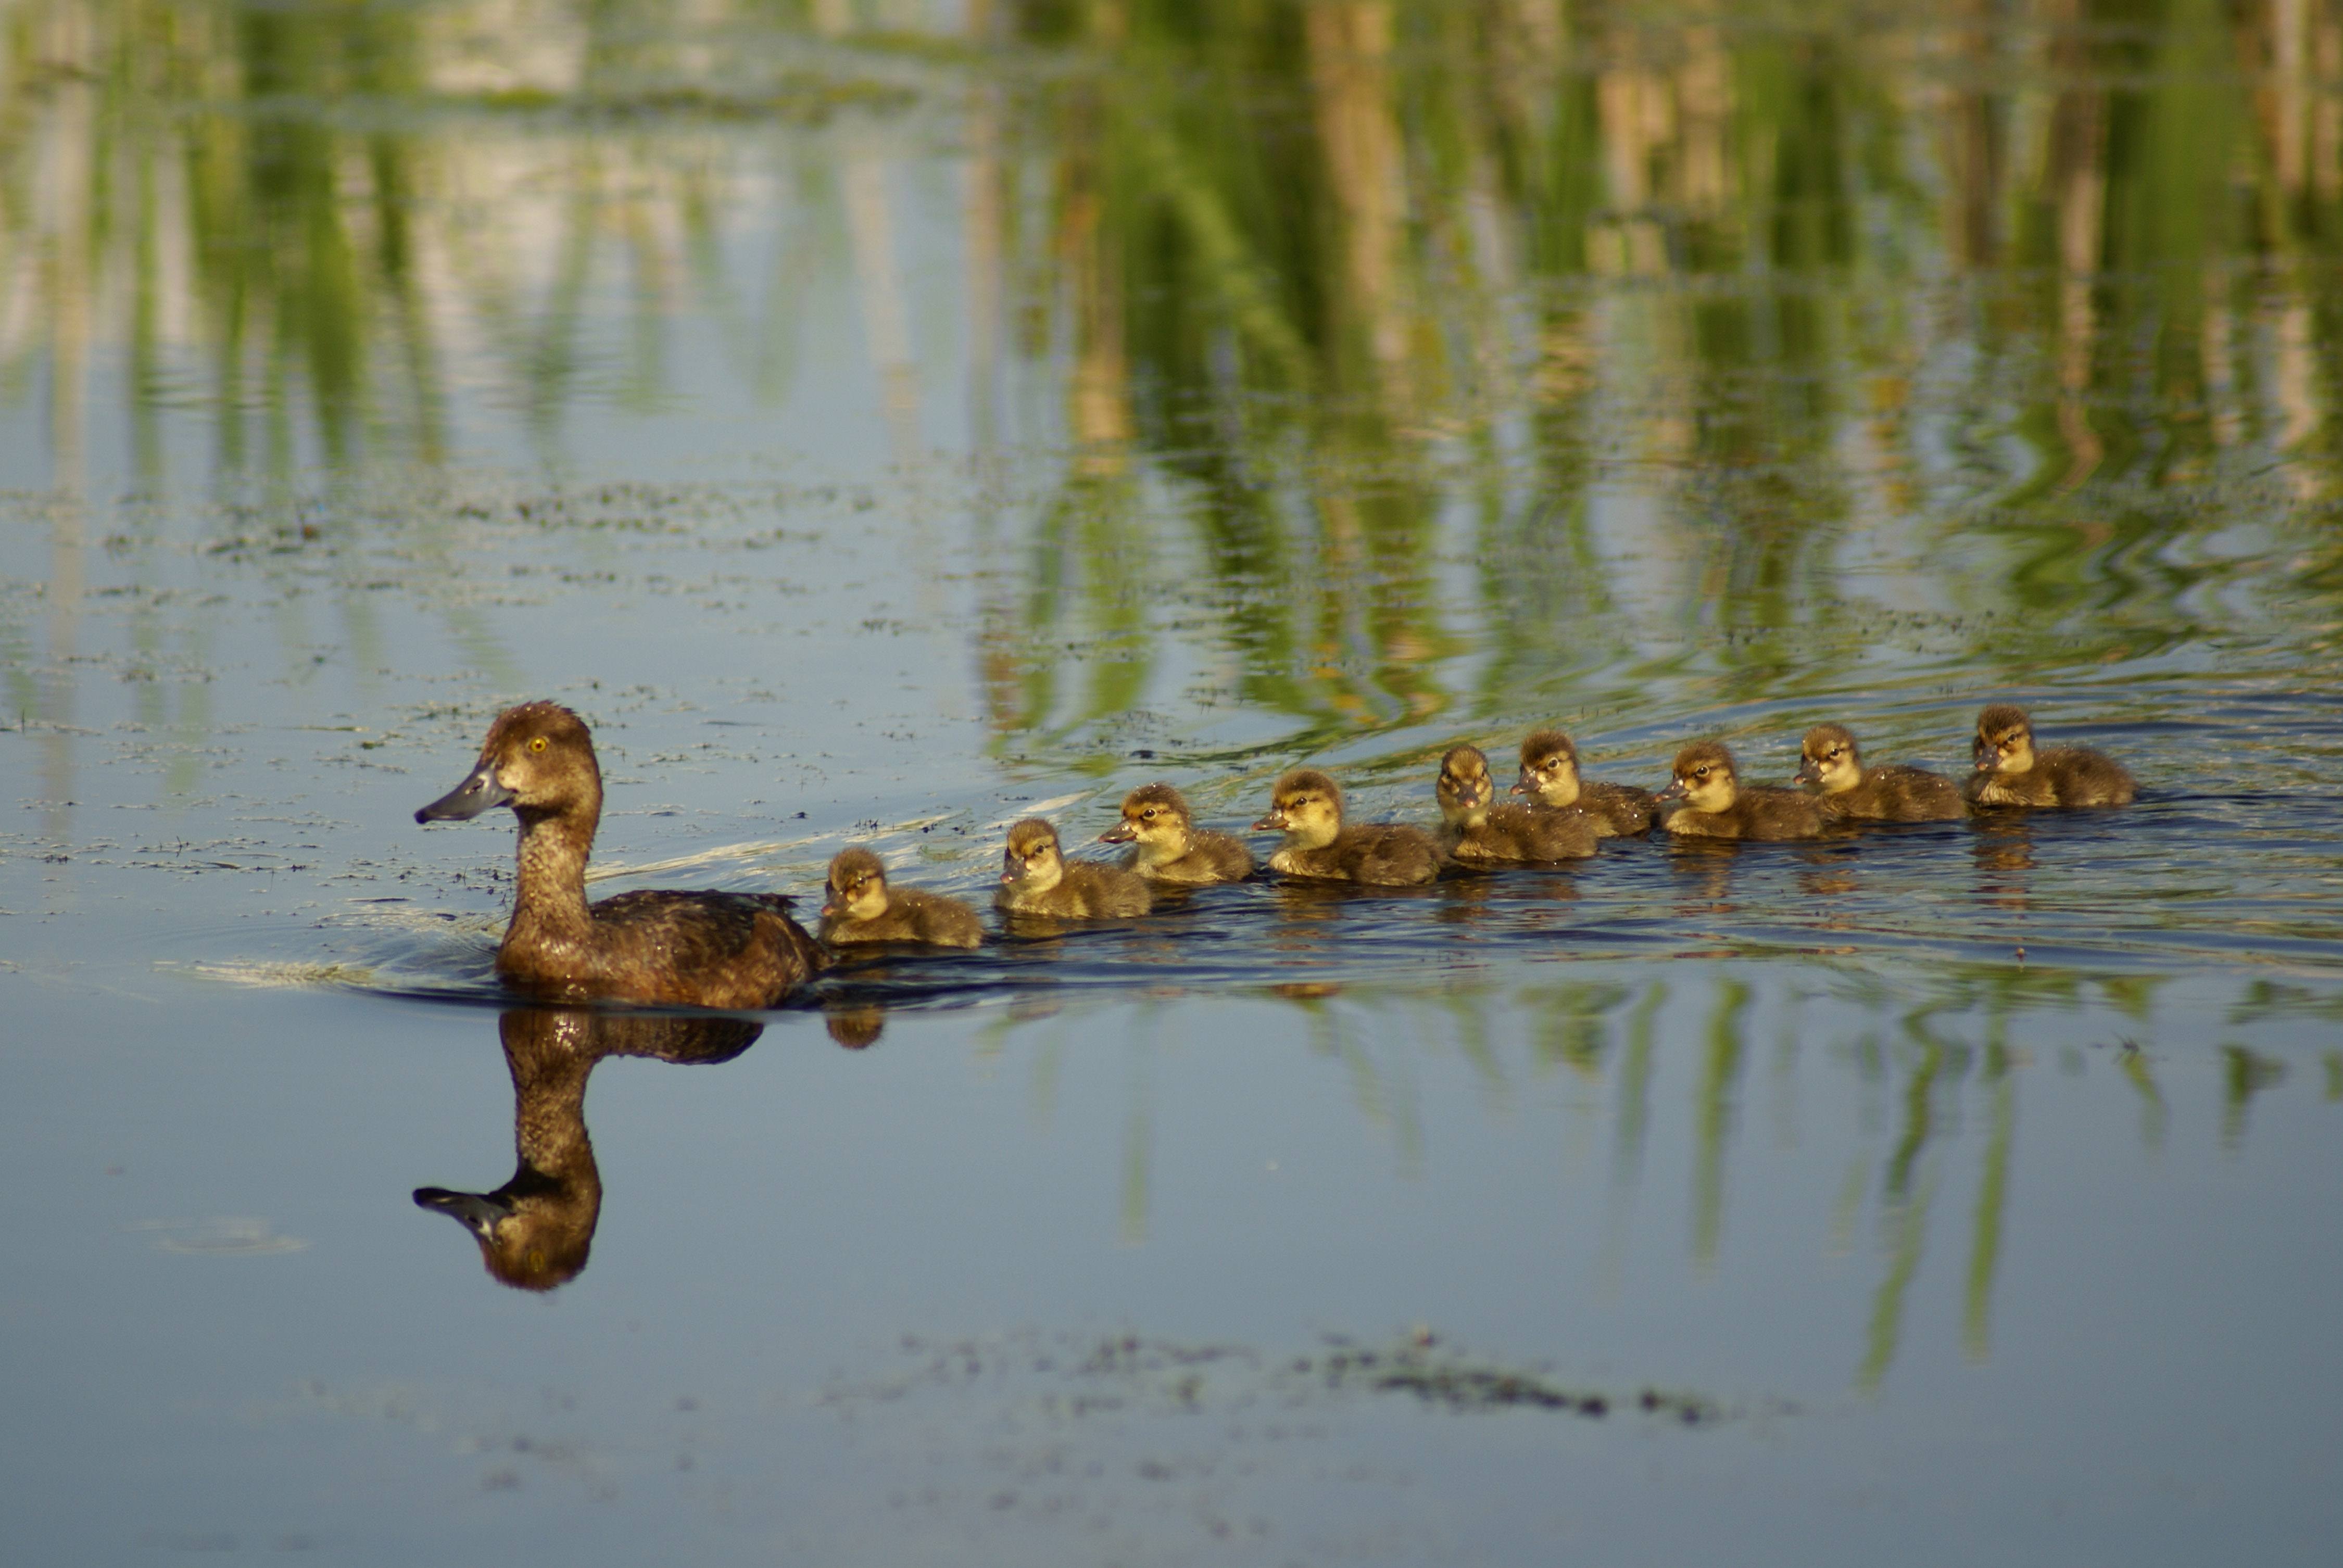 SWIMMING PROUD- A mother duck shows off her nine little ducklings all in a row as they learn how to swim.